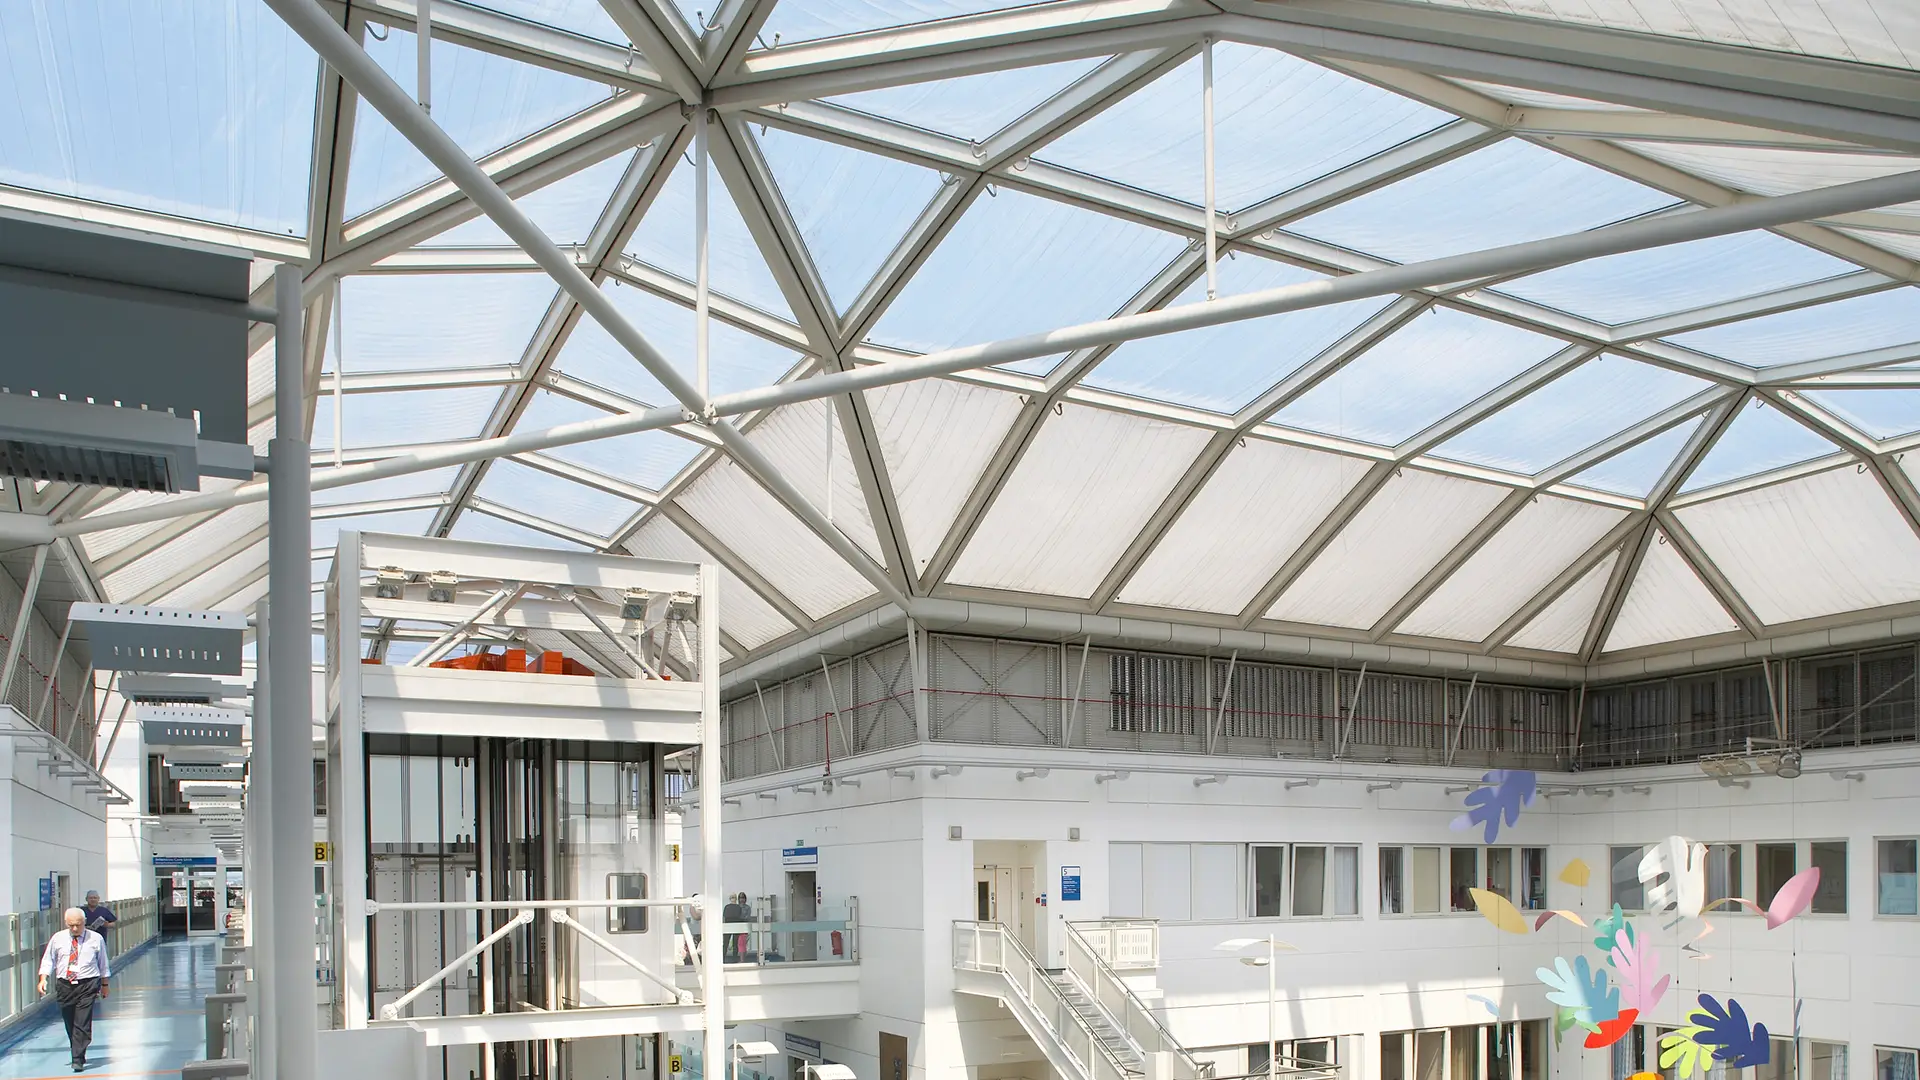 Build in 1990, Chelsea & Westminster Hospital is the oldest Texlon® ETFE project by Vector Foiltec in the United Kingdom. 